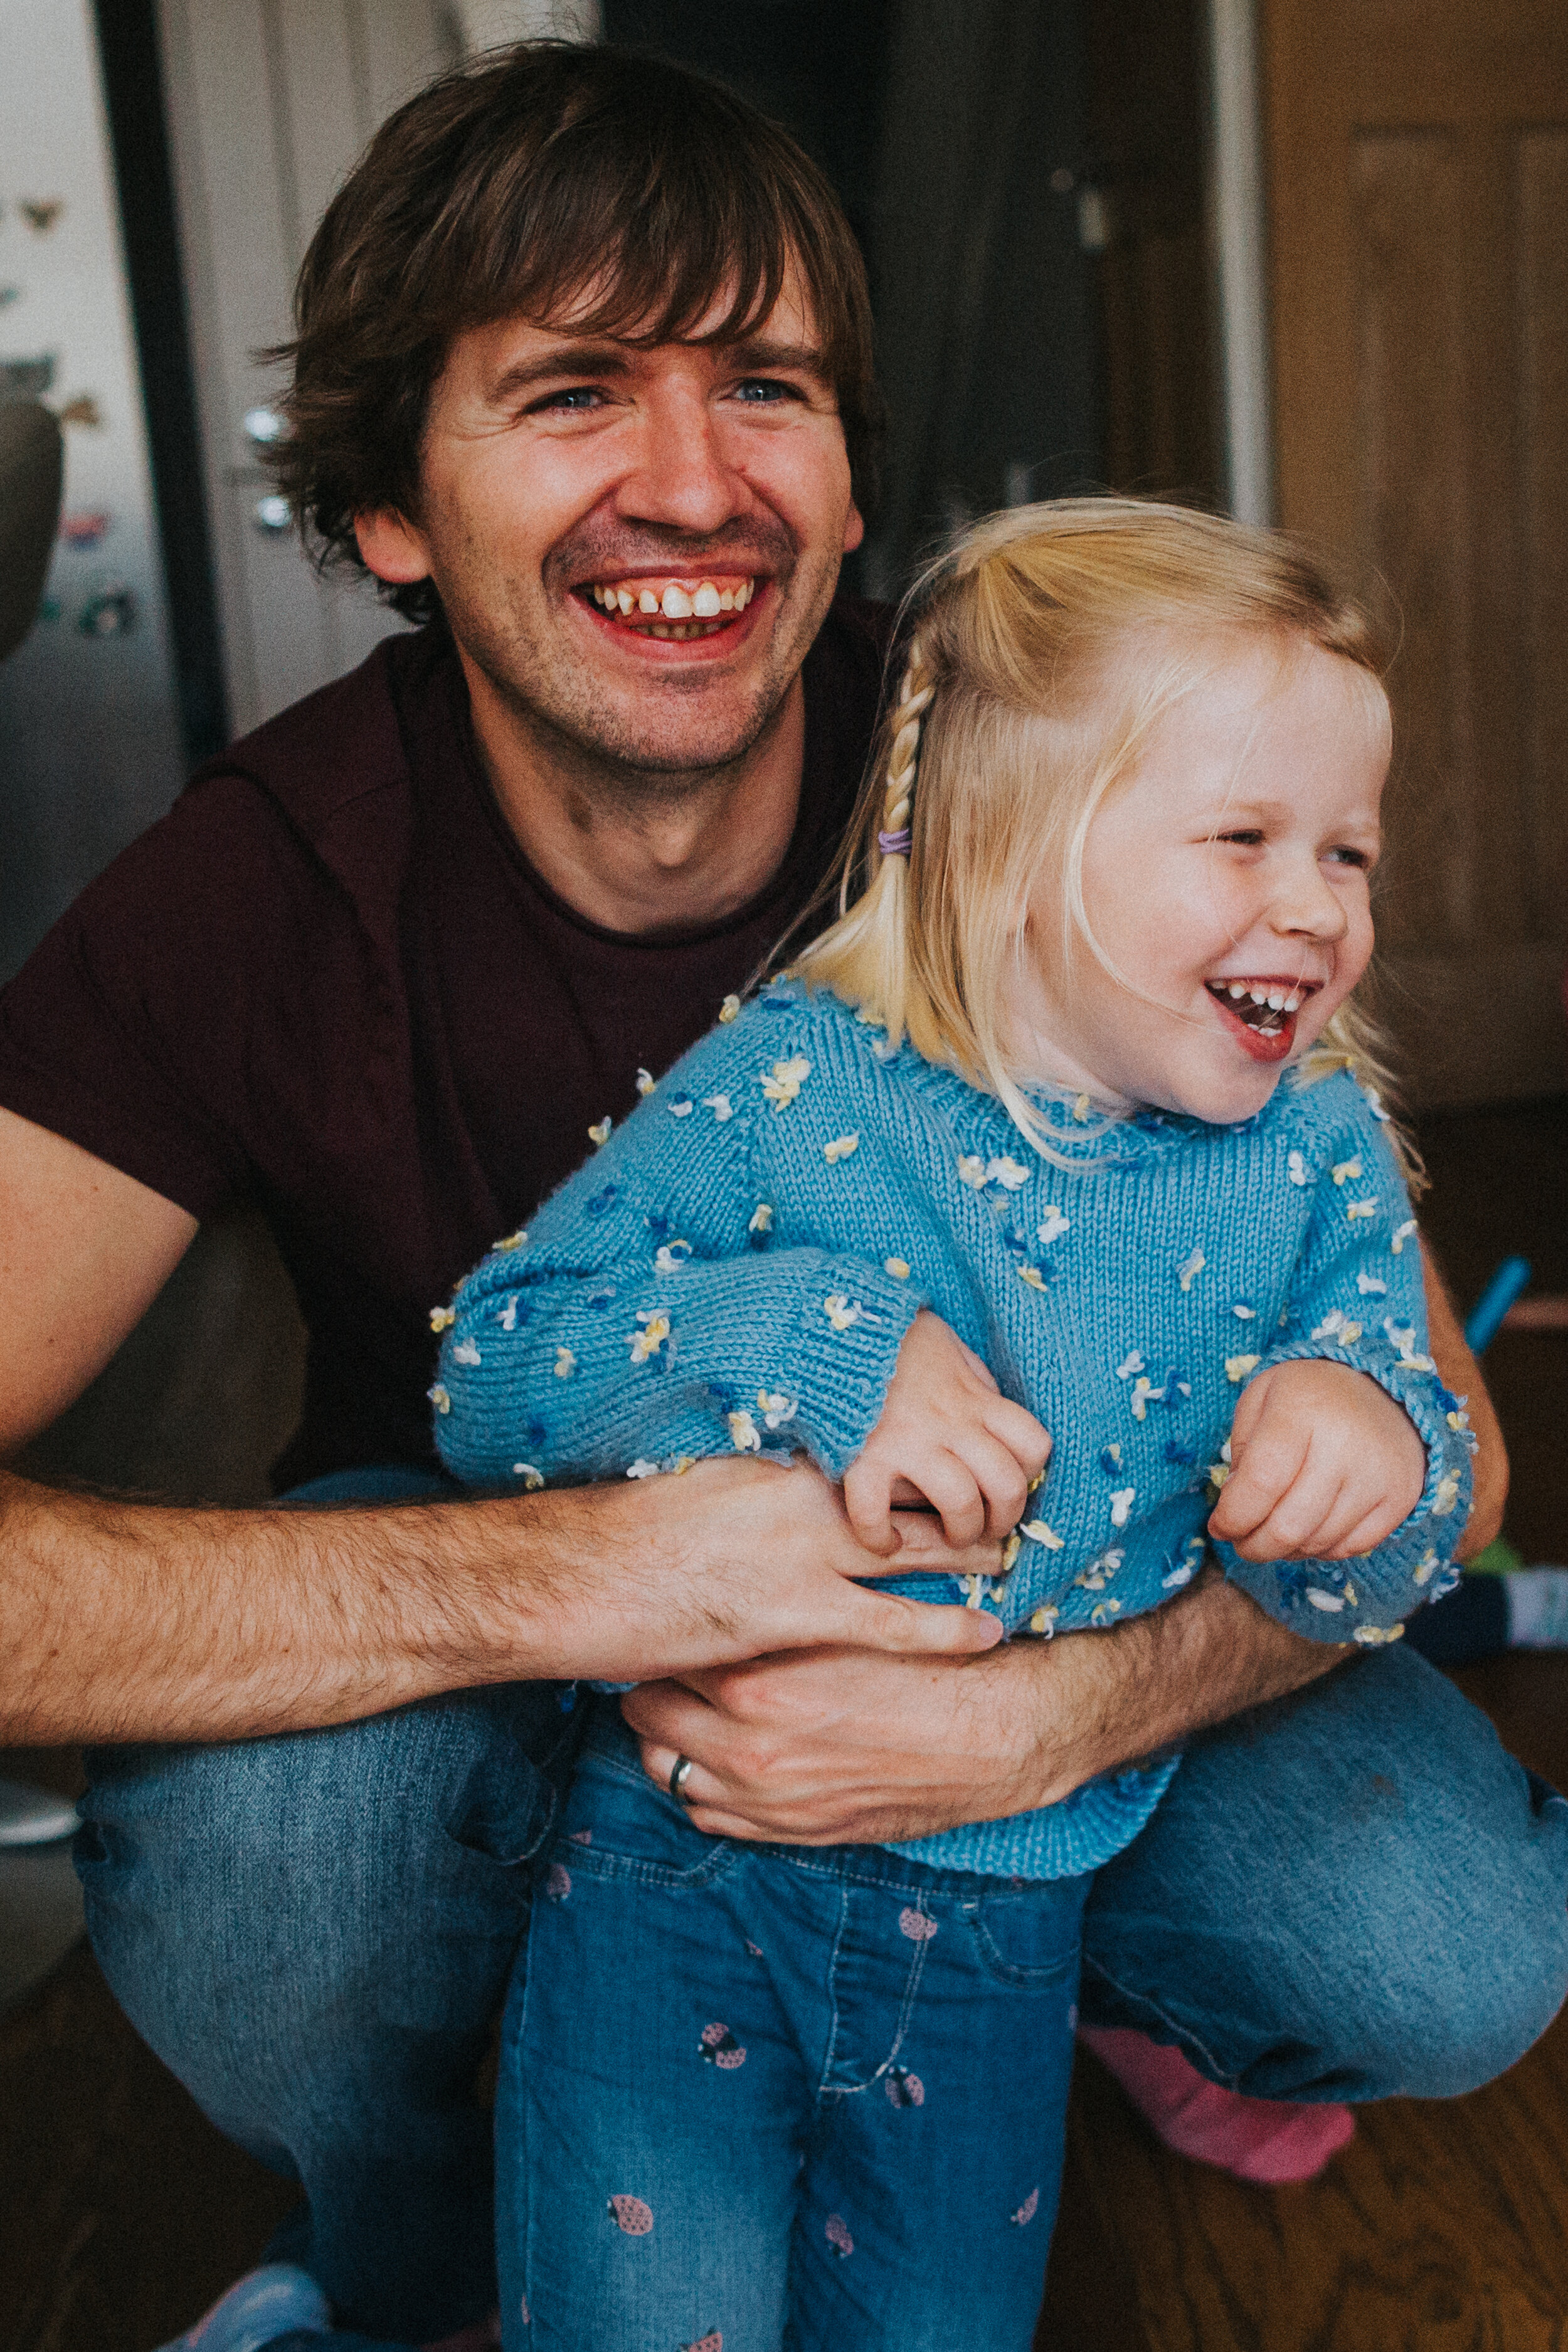 Dad and little girl laughing together.